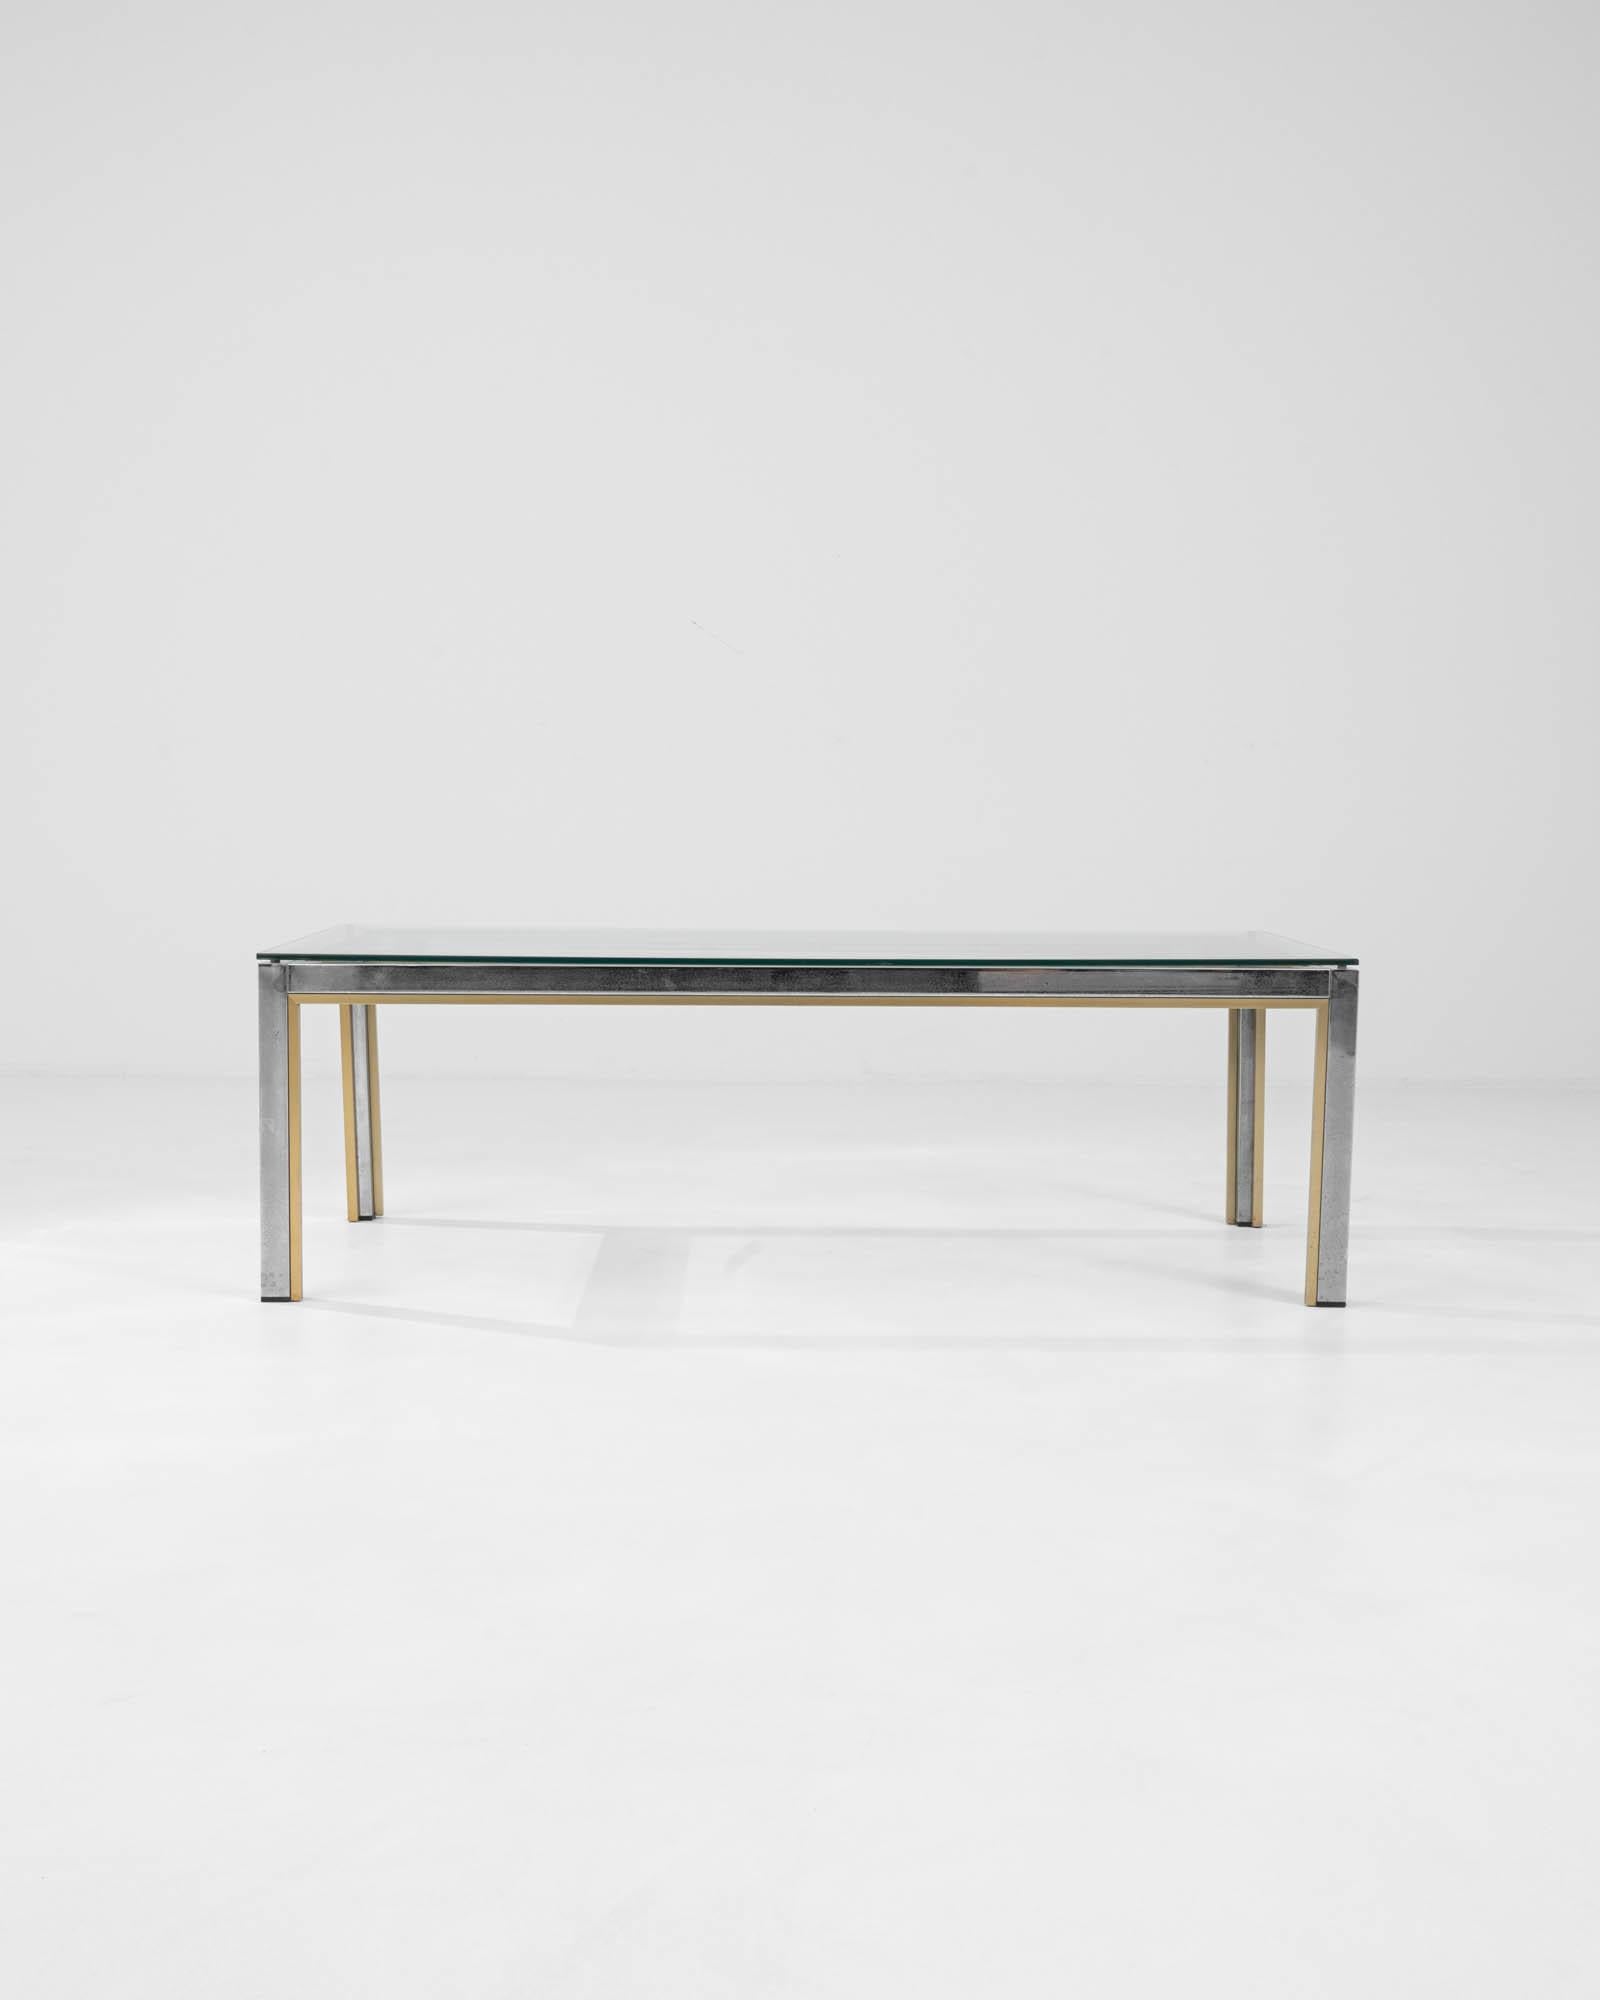 This exquisite 20th Century Italian Brass Coffee Table by Renato Zevi is a masterpiece of mid-century modern design. The table's sleek, minimalist lines are accentuated by the subtle gleam of brass, offering a sophisticated yet unassuming elegance.